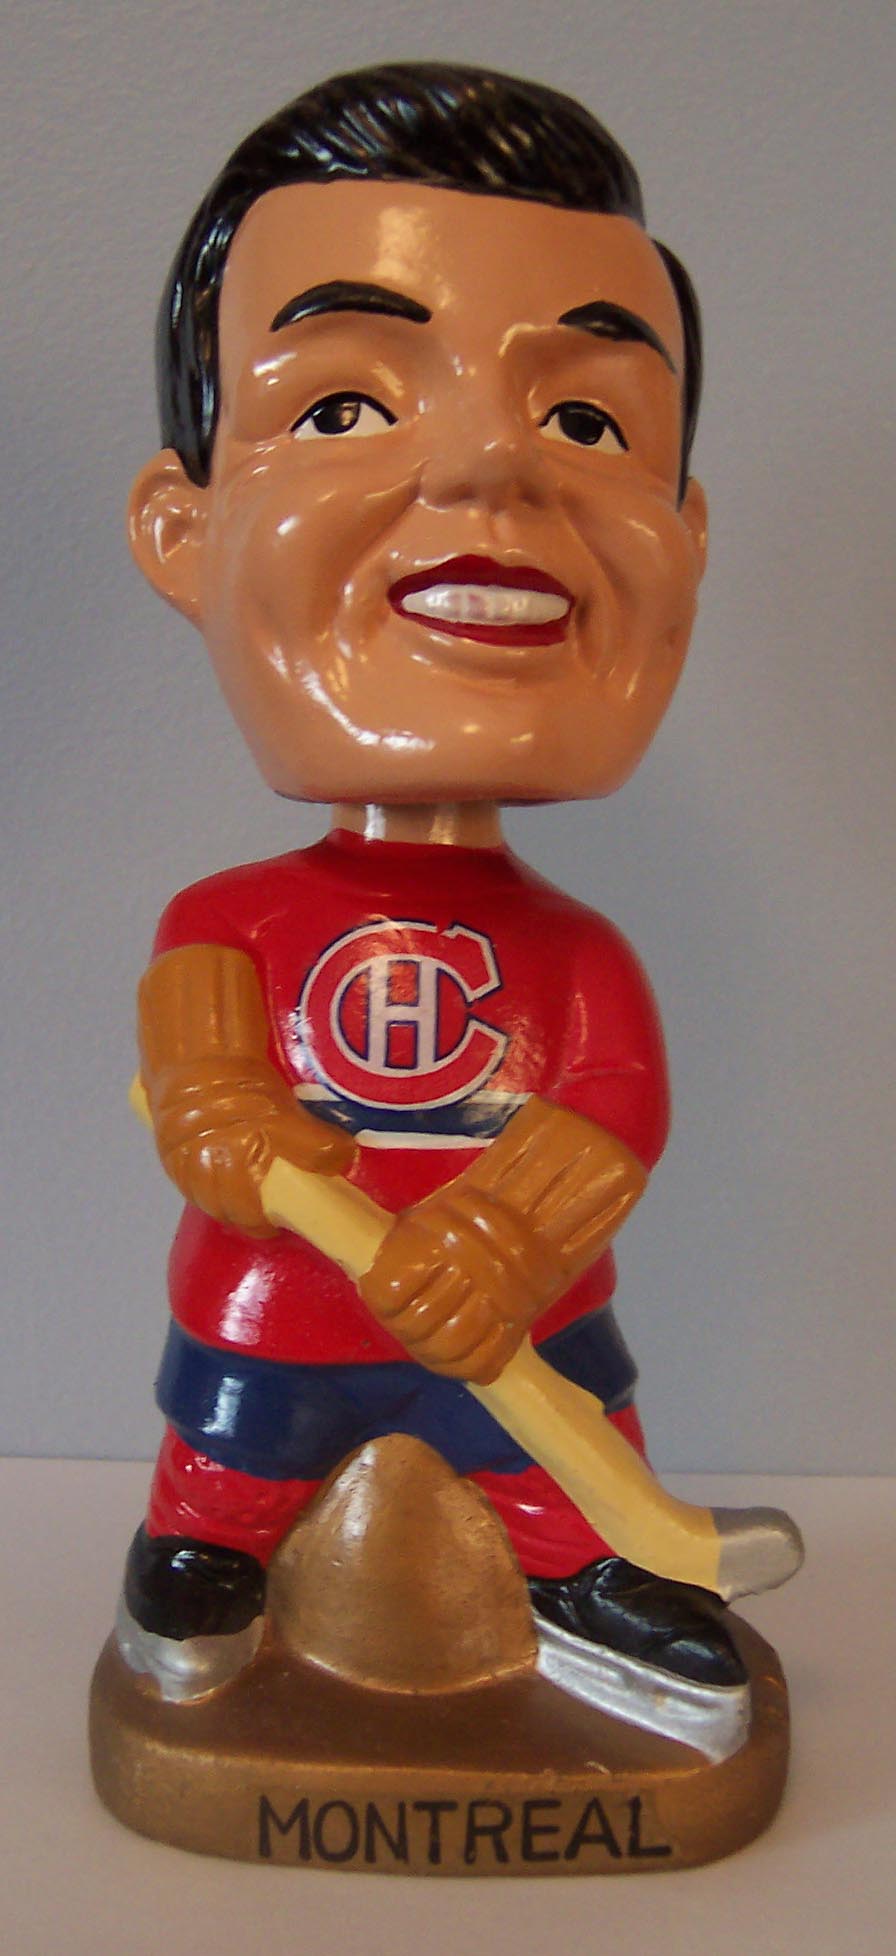 Montreal_Canadiens doll